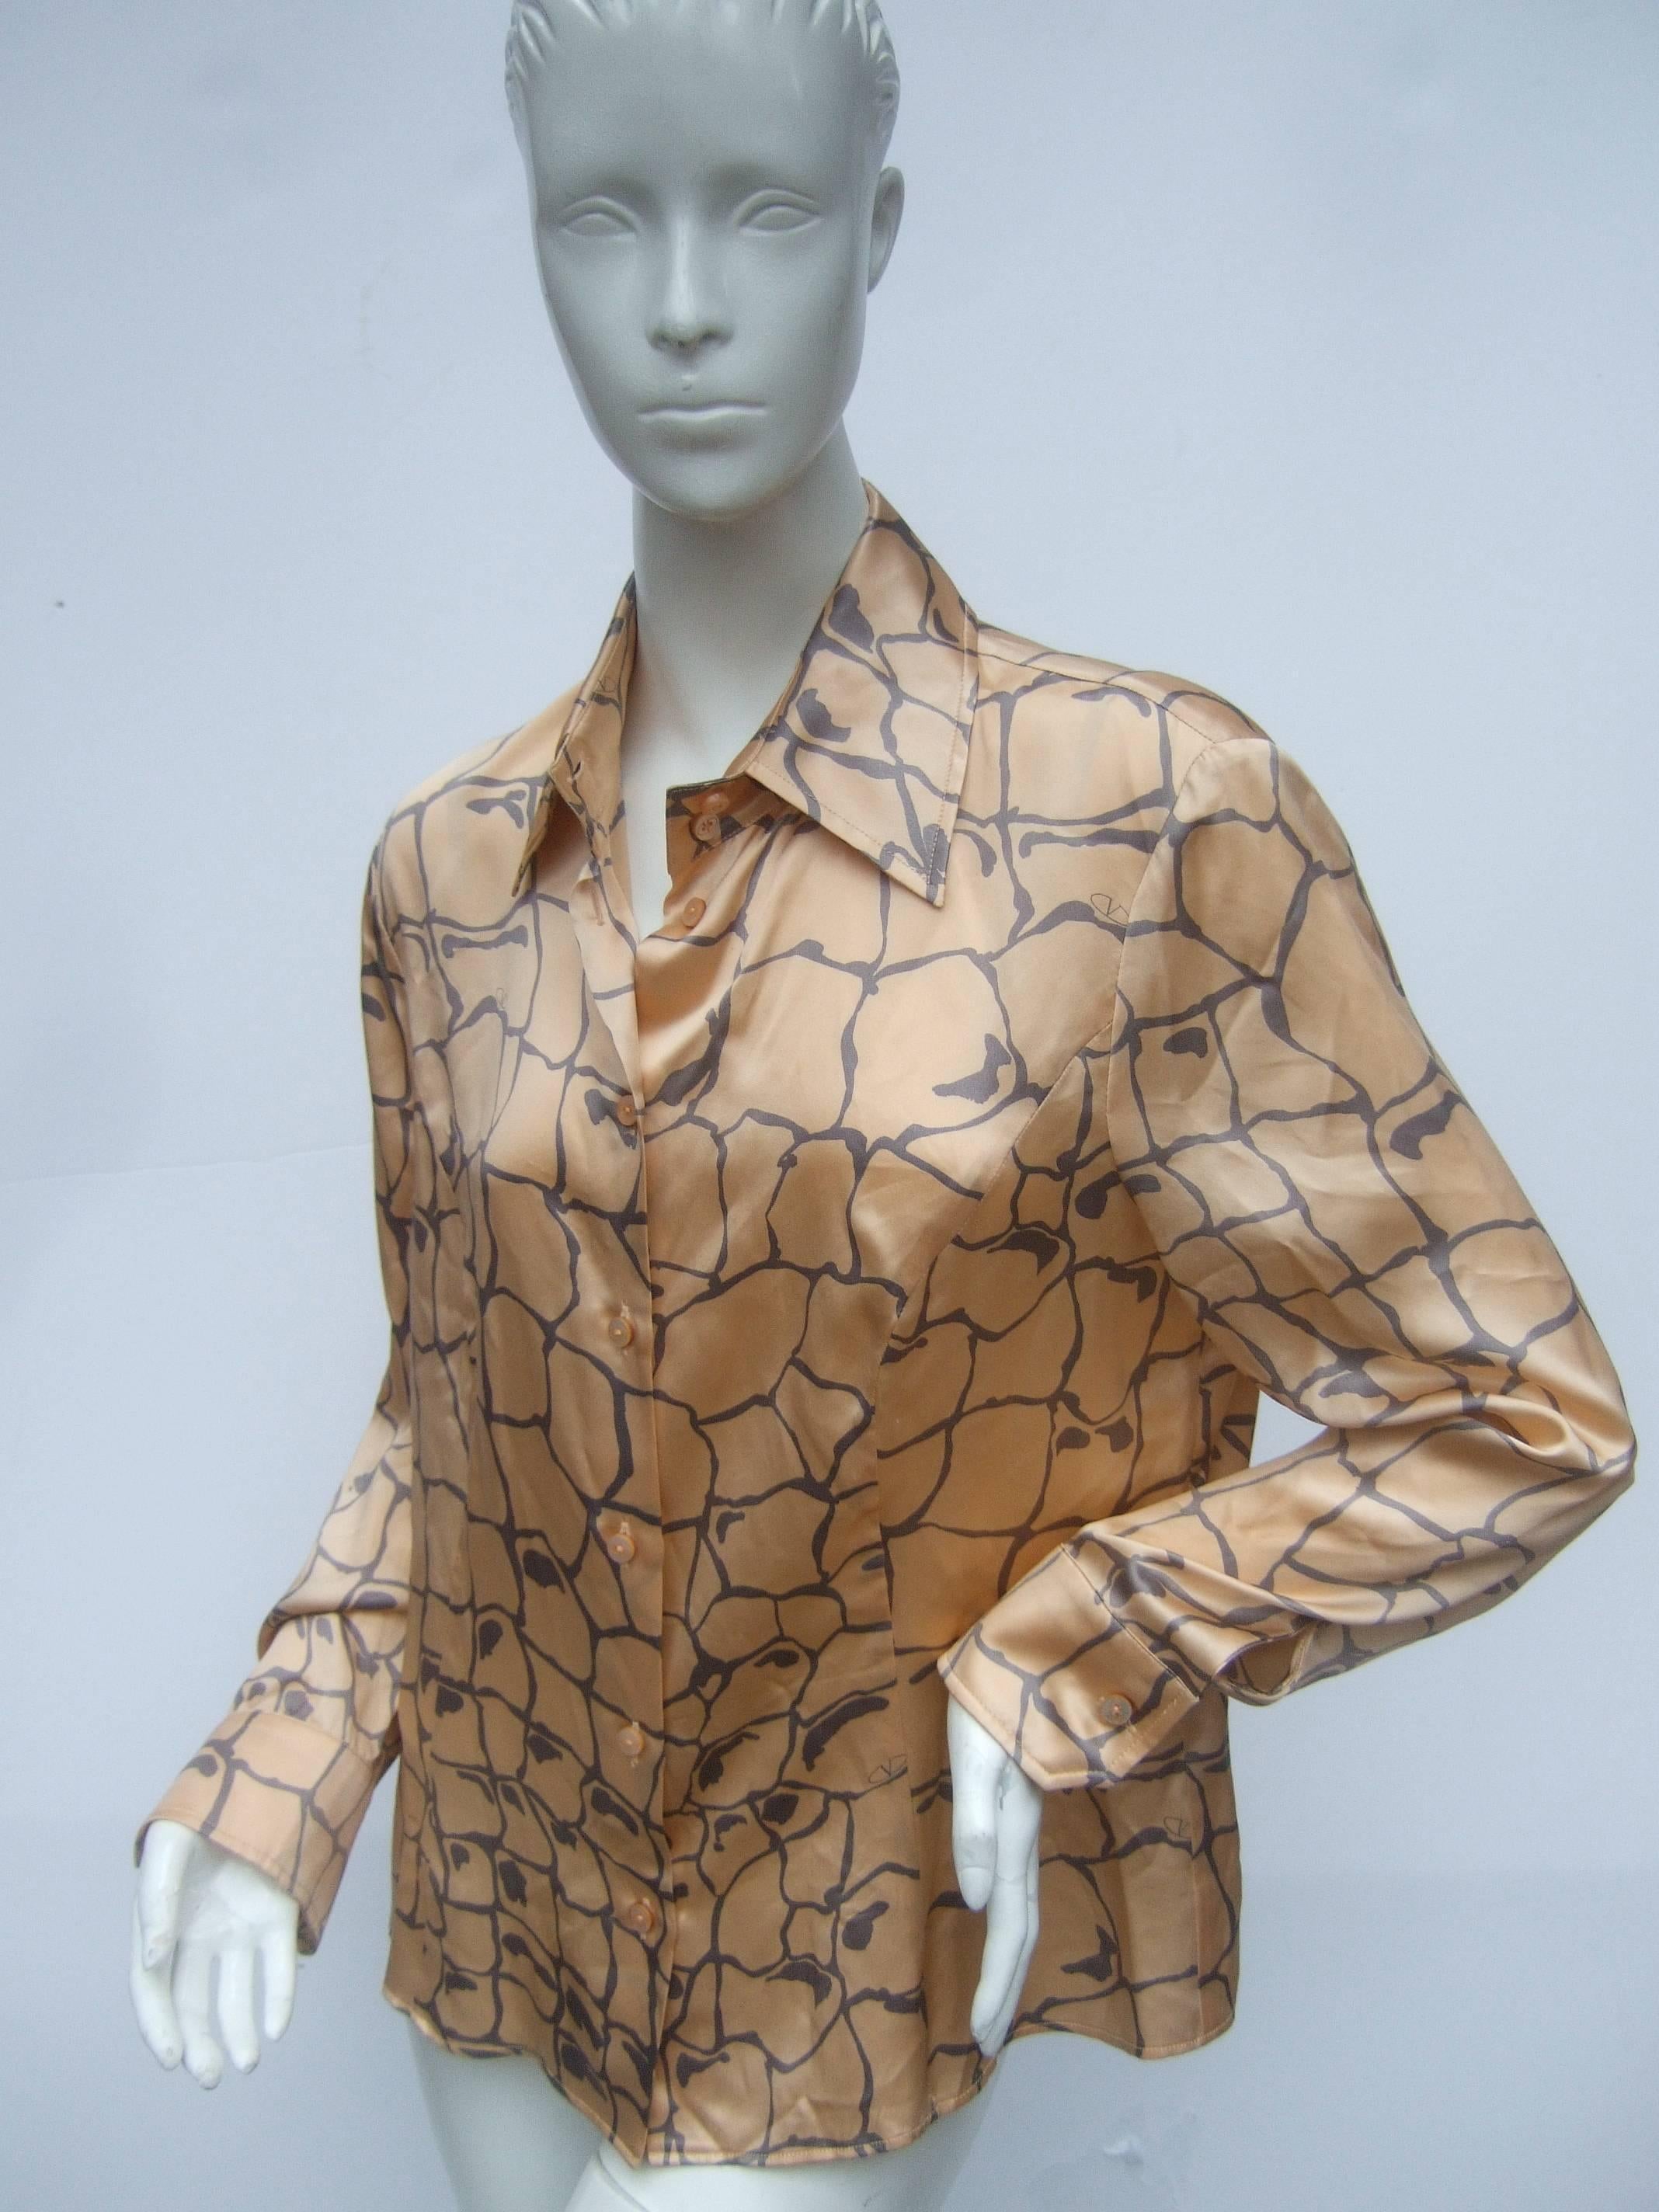 Valentino Italy Silk Charmeuse Peach and Gray Print Blouse US Size 12  en vente 3